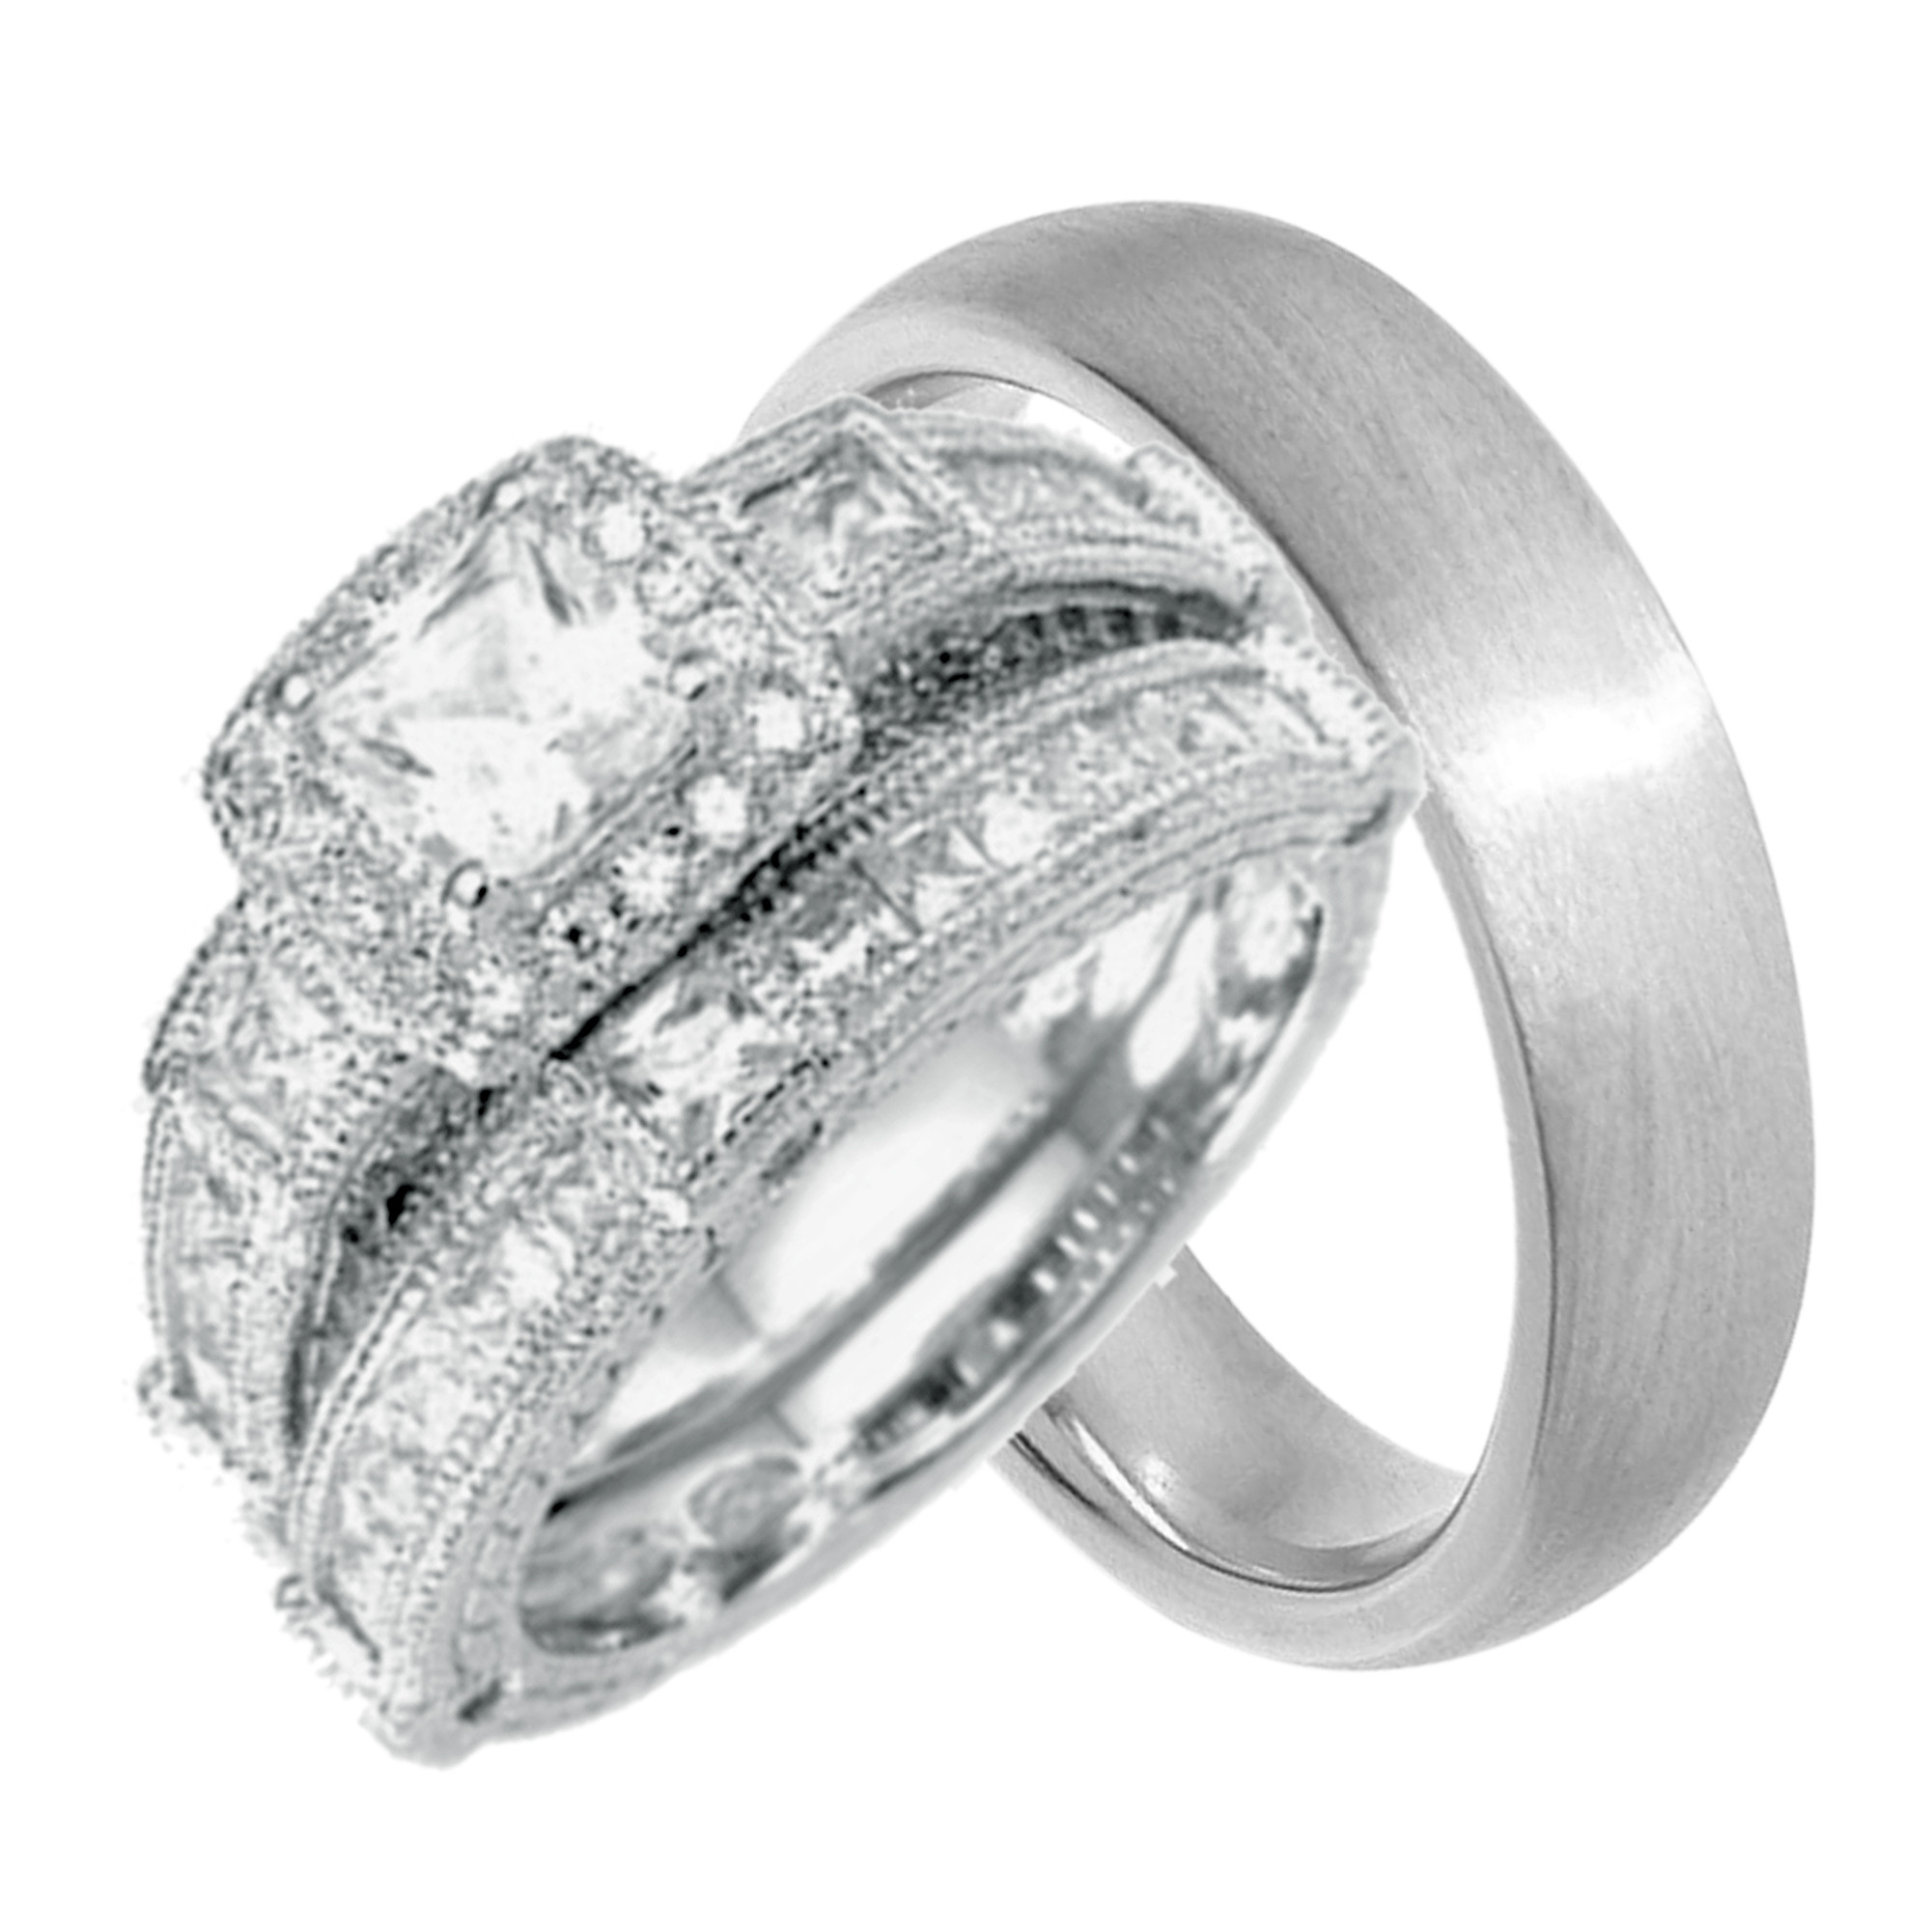 Affordable Wedding Rings For Him And Her
 LaRaso & Co His and Hers Wedding Ring Set Cheap Wedding